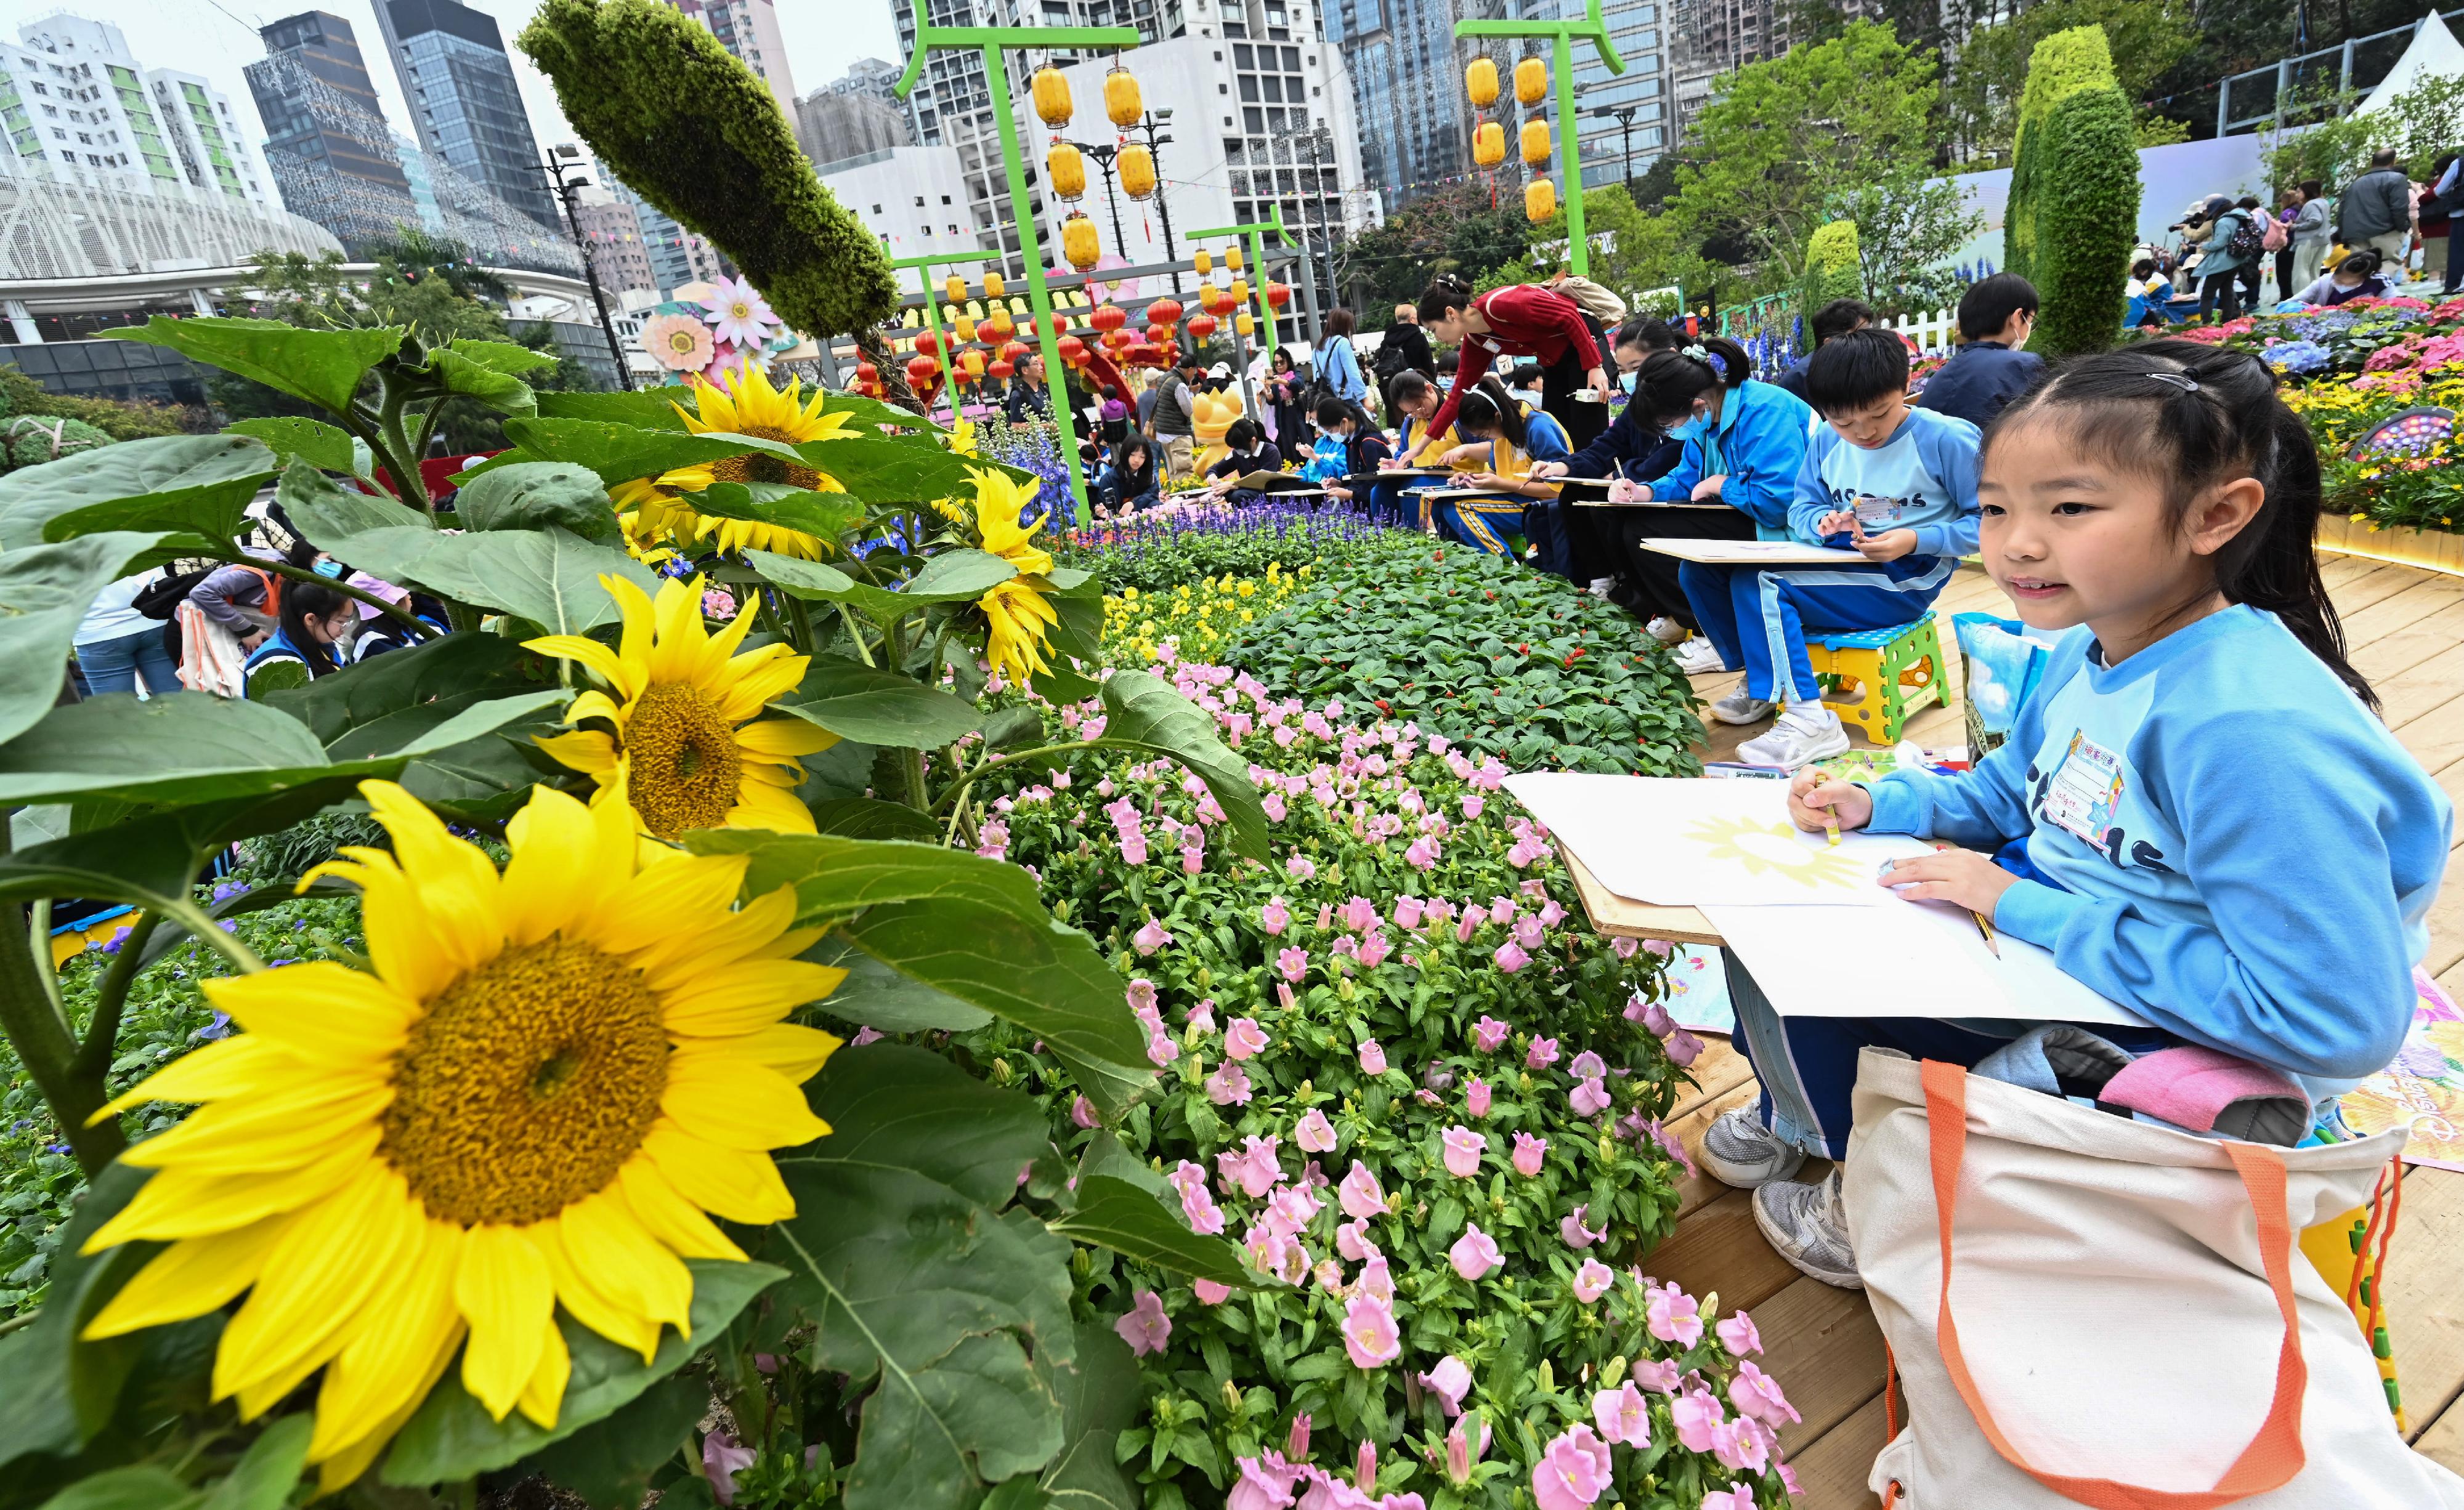 The annual Hong Kong Flower Show extravaganza opened at Victoria Park today (March 15) with some 420 000 flowers on display, including about 40 000 angelonias as the theme flower. The Jockey Club Student Drawing Competition held today attracted about 2 200 participants.
